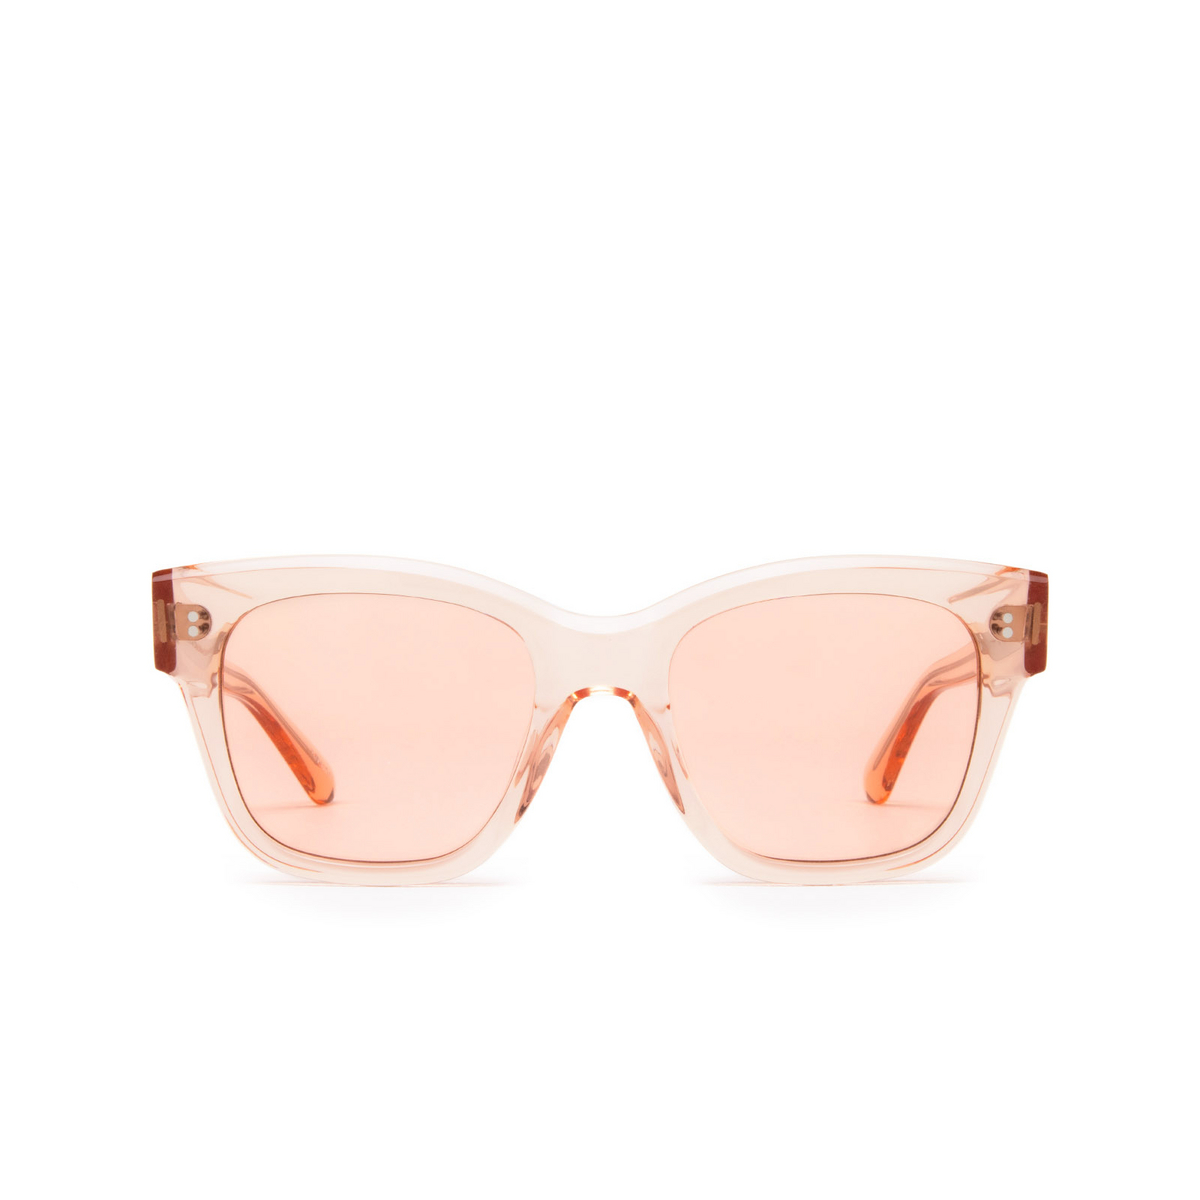 Chimi® Butterfly Sunglasses: 07 color Pink - front view